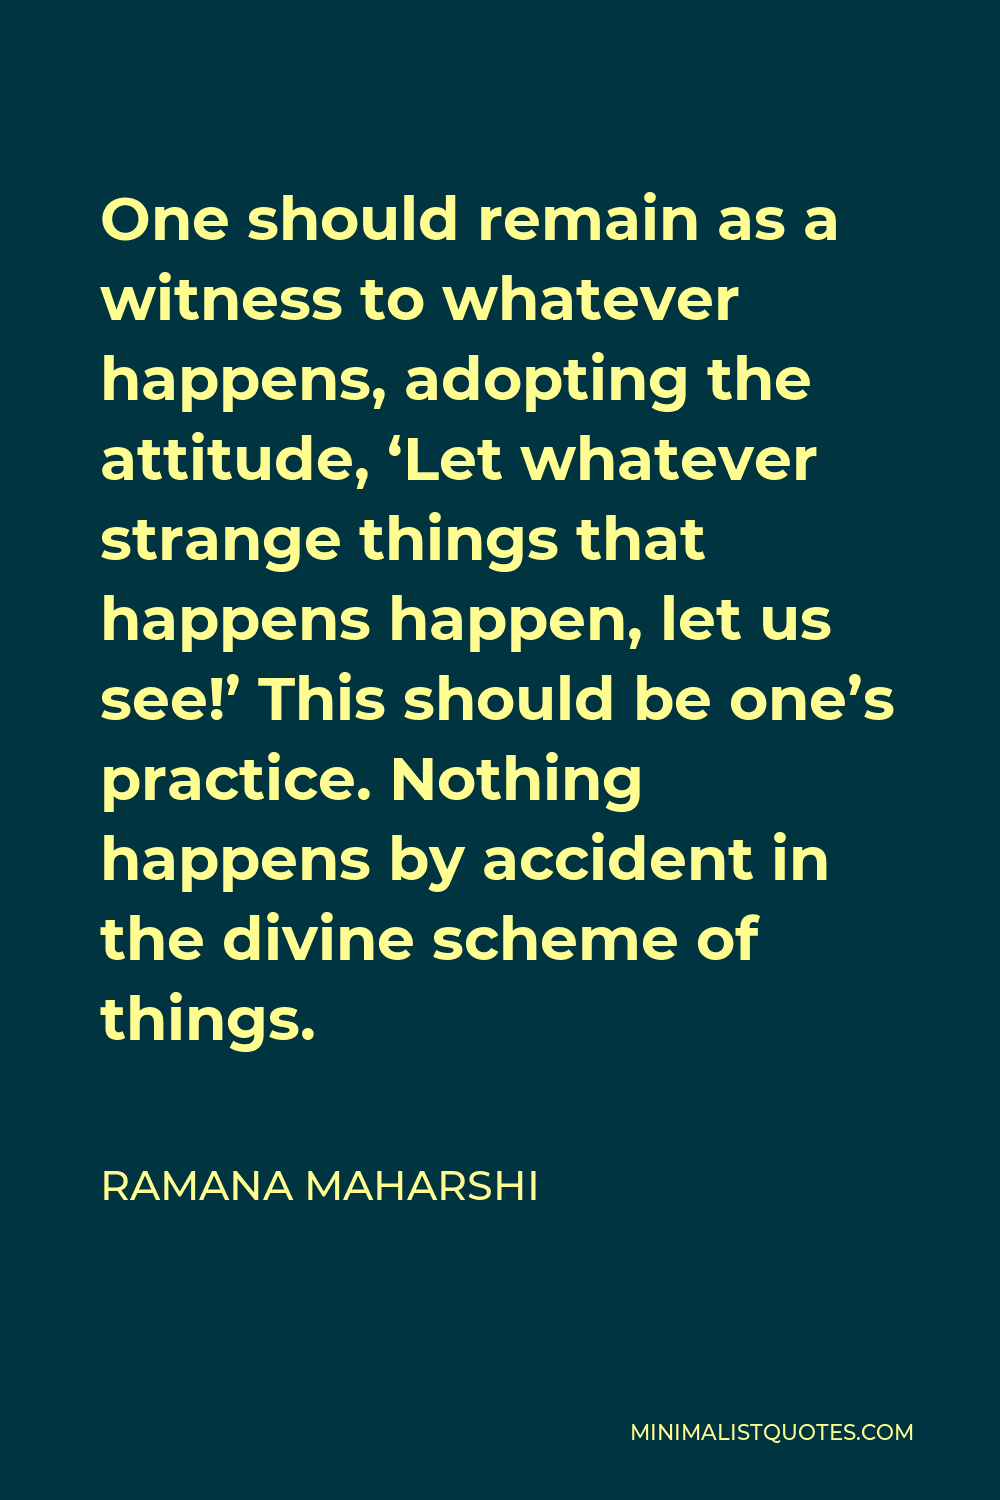 Ramana Maharshi Quote - One should remain as a witness to whatever happens, adopting the attitude, ‘Let whatever strange things that happens happen, let us see!’ This should be one’s practice. Nothing happens by accident in the divine scheme of things.